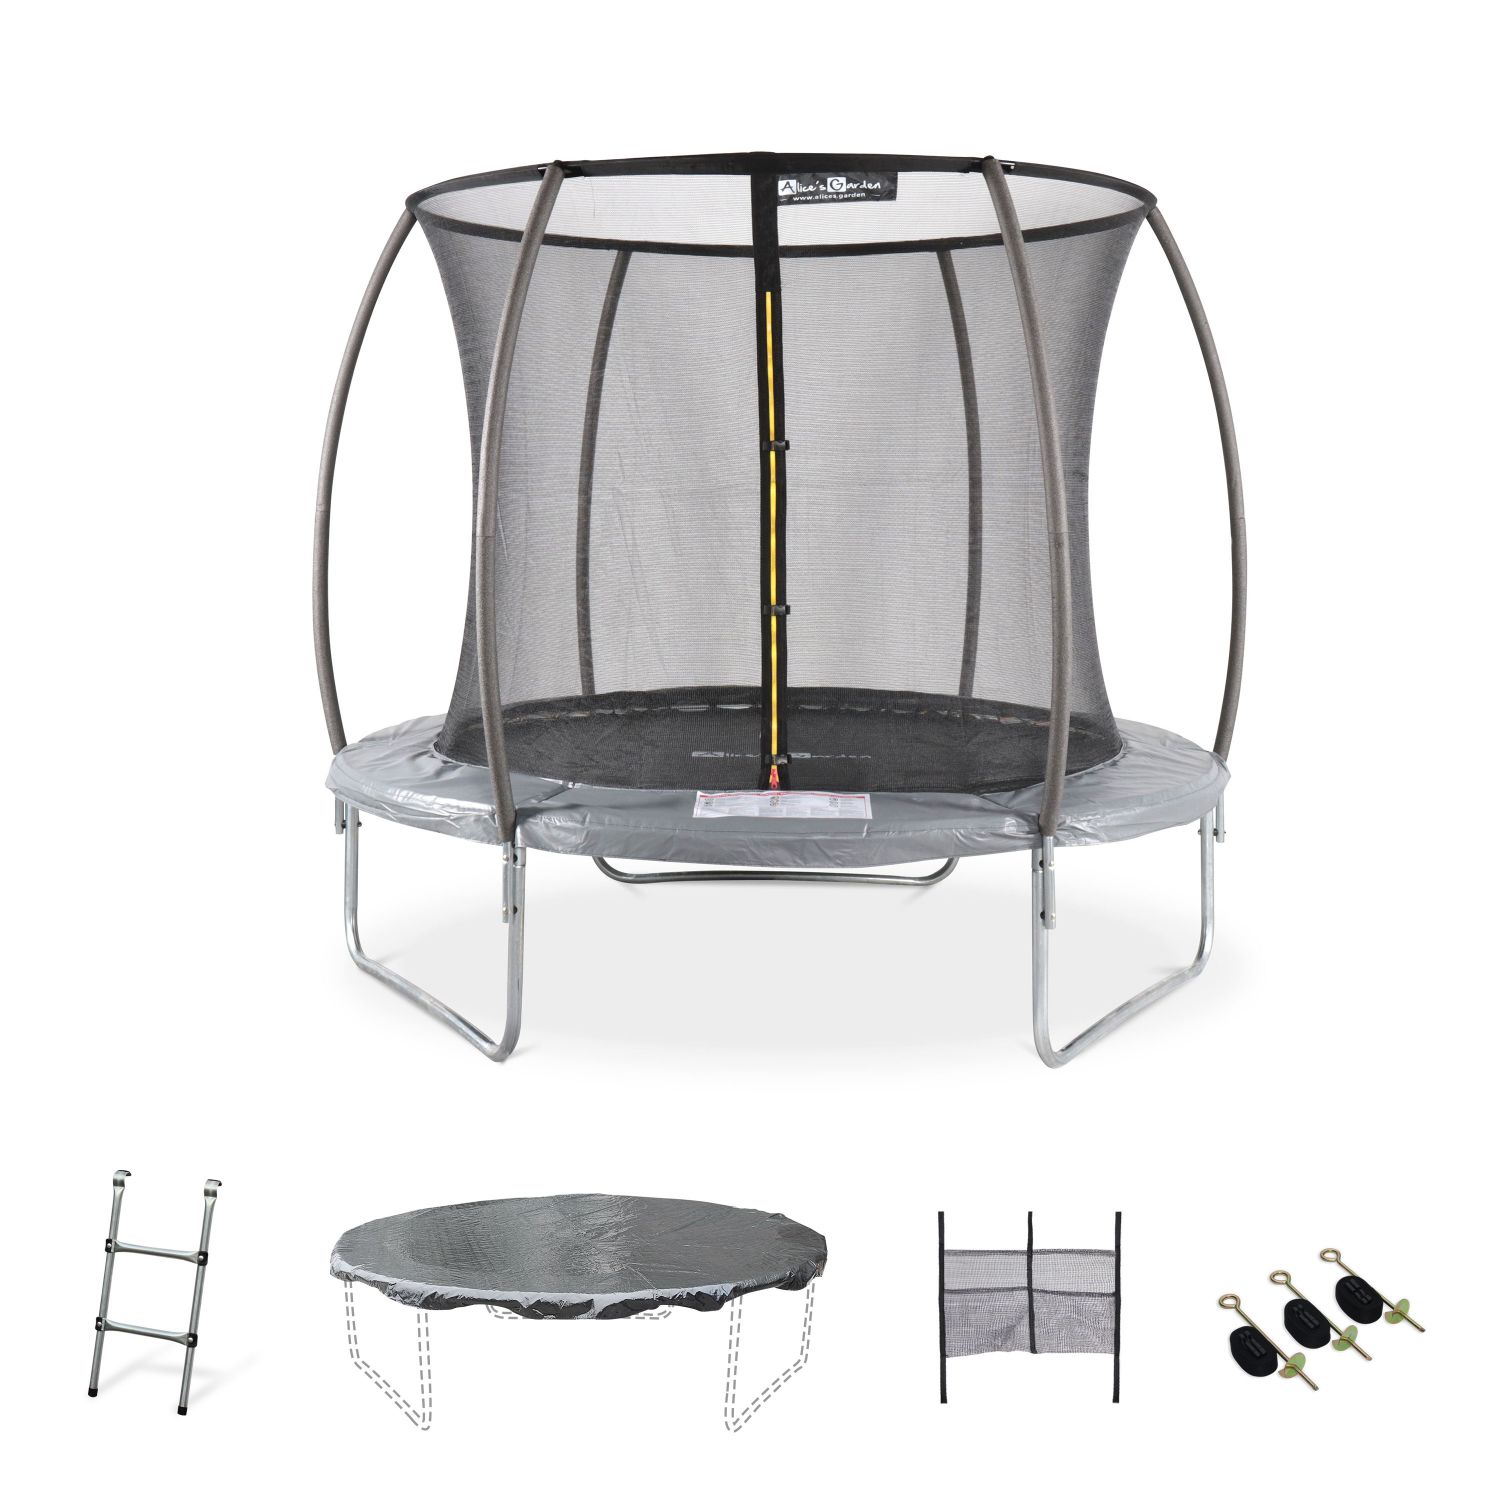 8FT TRAMPOLINE WITH ACCESSORIES KIT - PLUTON INNER